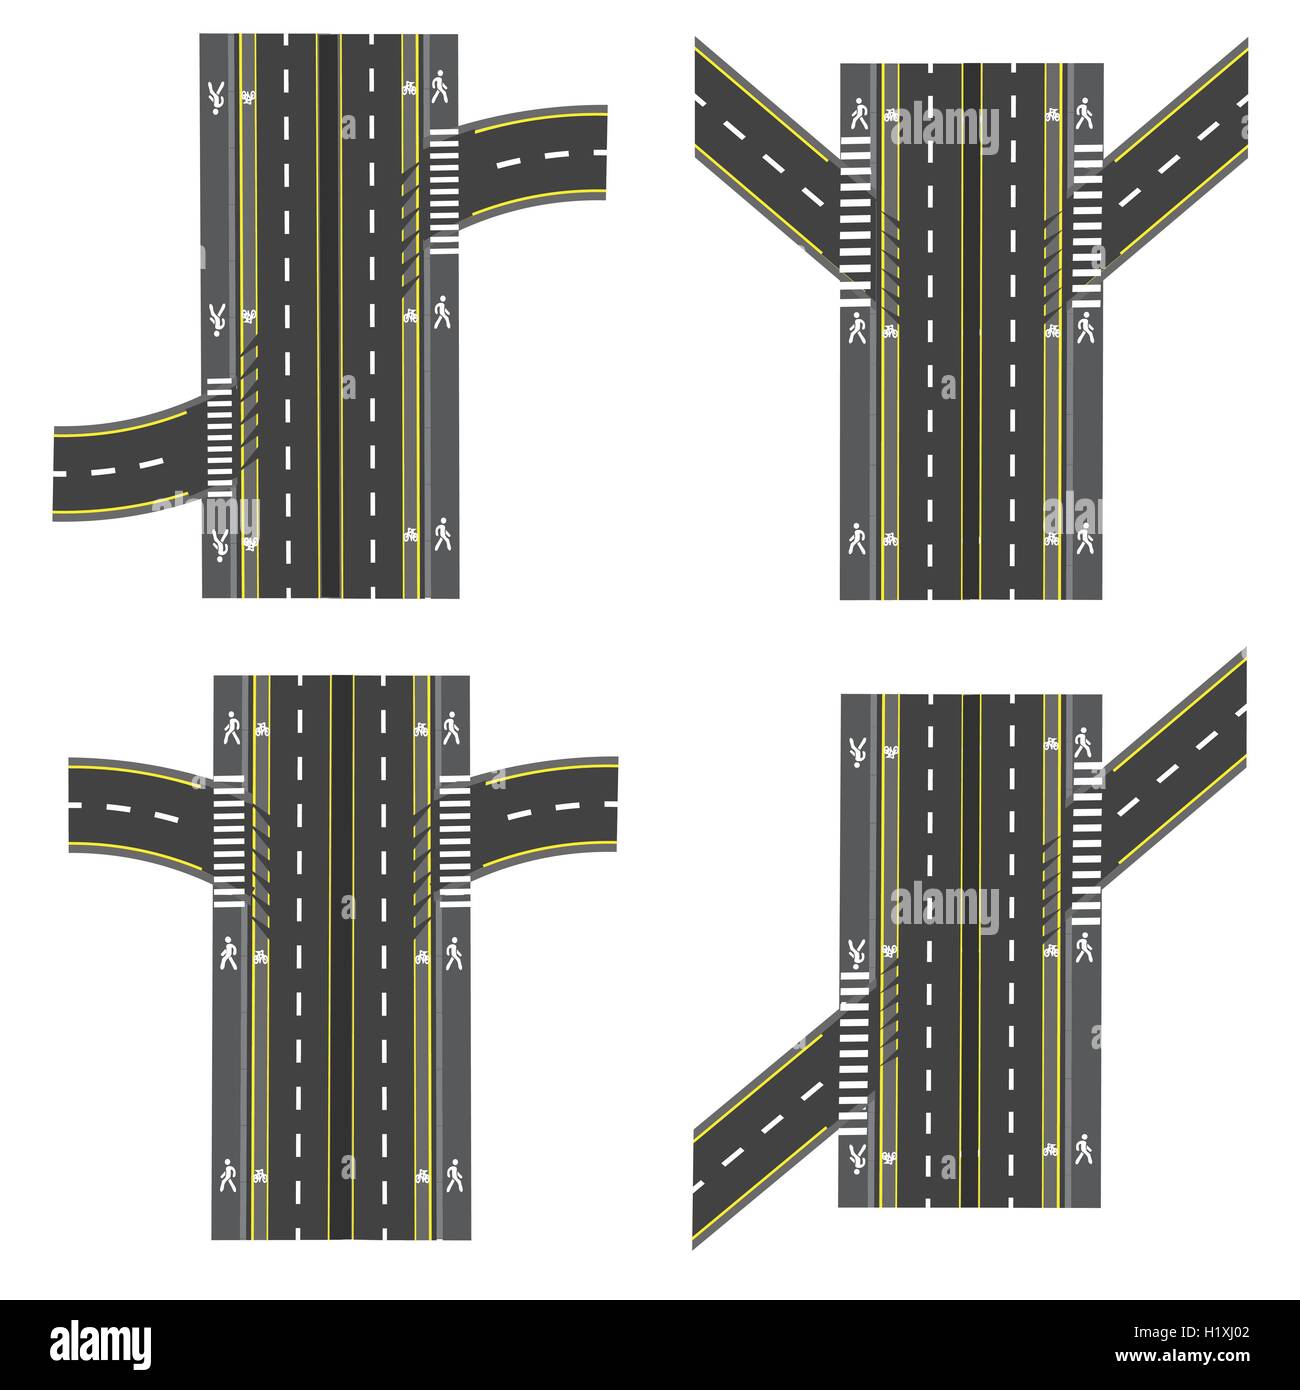 Set of different road sections, interchanges transpot, bike paths, sidewalks and intersections. Stock Vector